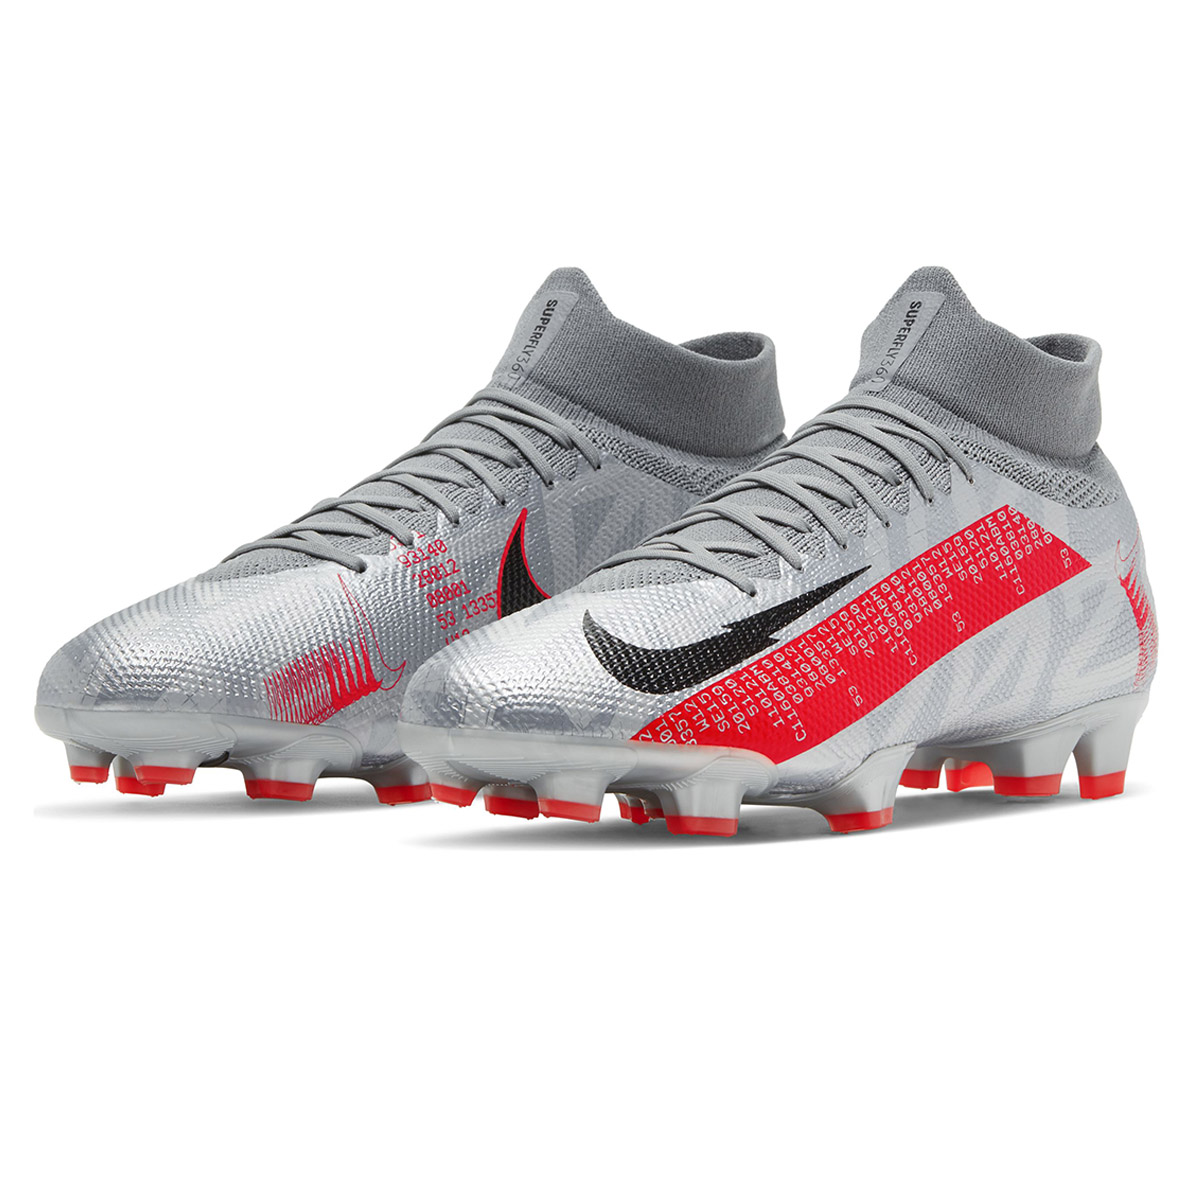 Botines Nike Mercurial Superfly 7 Pro FG,  image number null